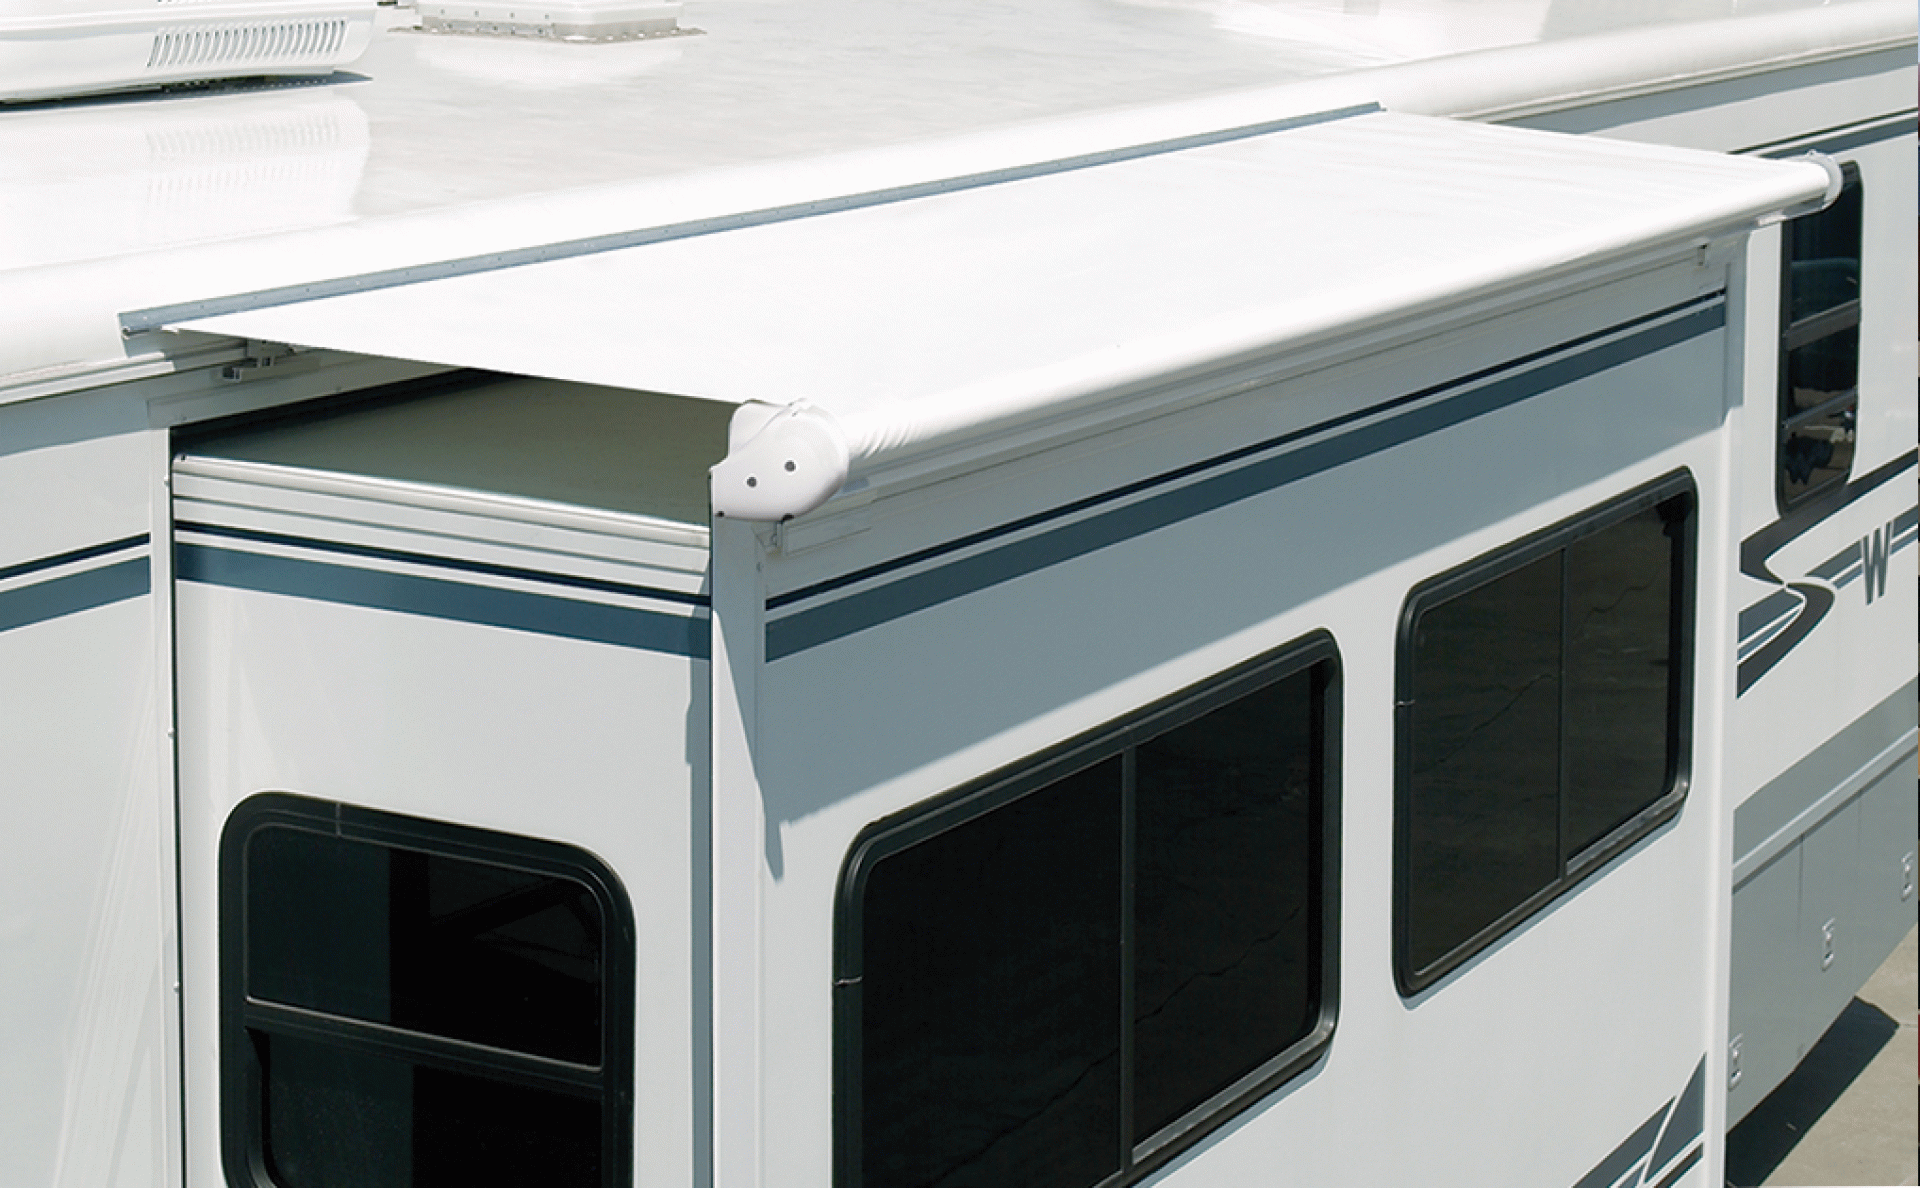 CAREFREE OF COLORADO | UQ0930025 | SIDEOUT KOVER III AWNING 86" - 93" ROOF RANGE WHITE VINYL FABRIC & DEFLECTOR